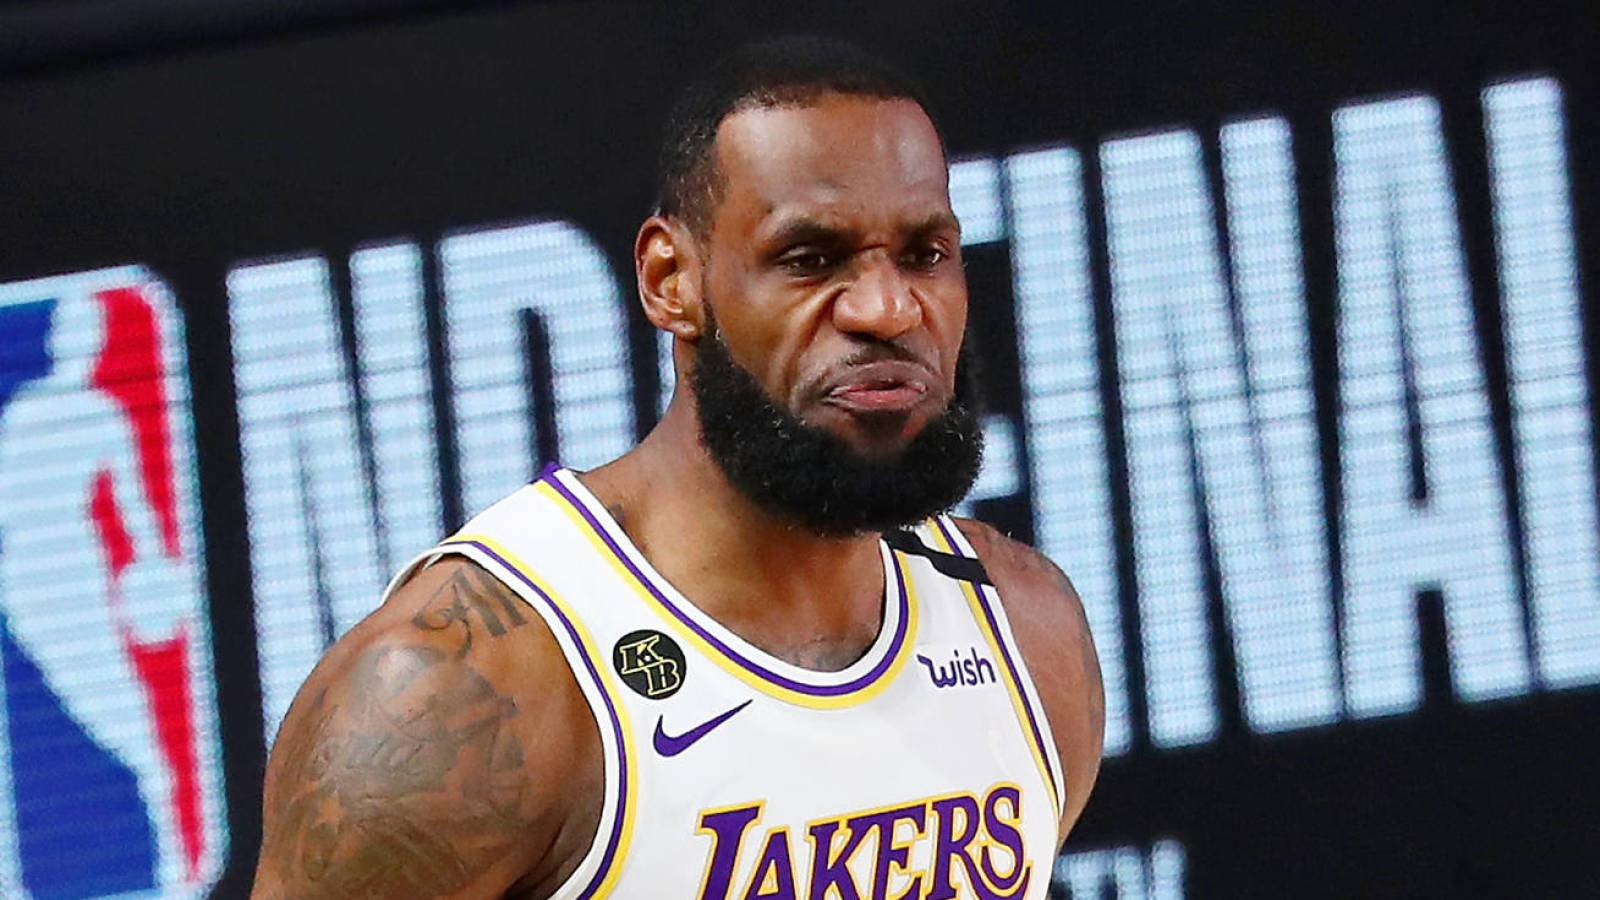 LeBron James, Lakers walk off court with time left in game | Yardbarker